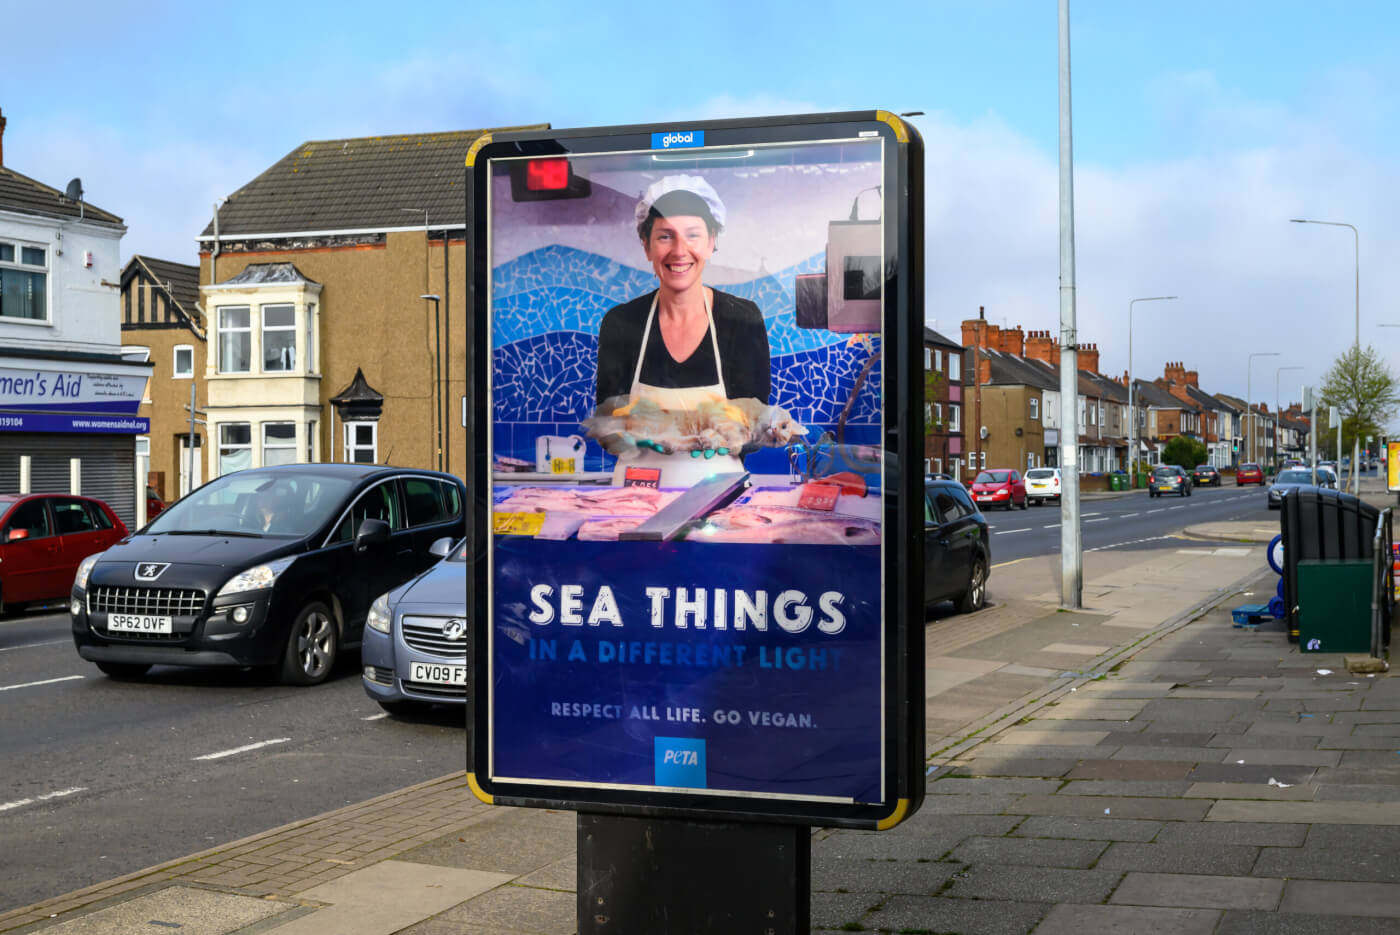 An advertisement put up by animal rights group PETA, in the English seaside town of Cleethorpes, has gone viral after suggesting that eating cats and fish is the same thing. Photo: PETA 